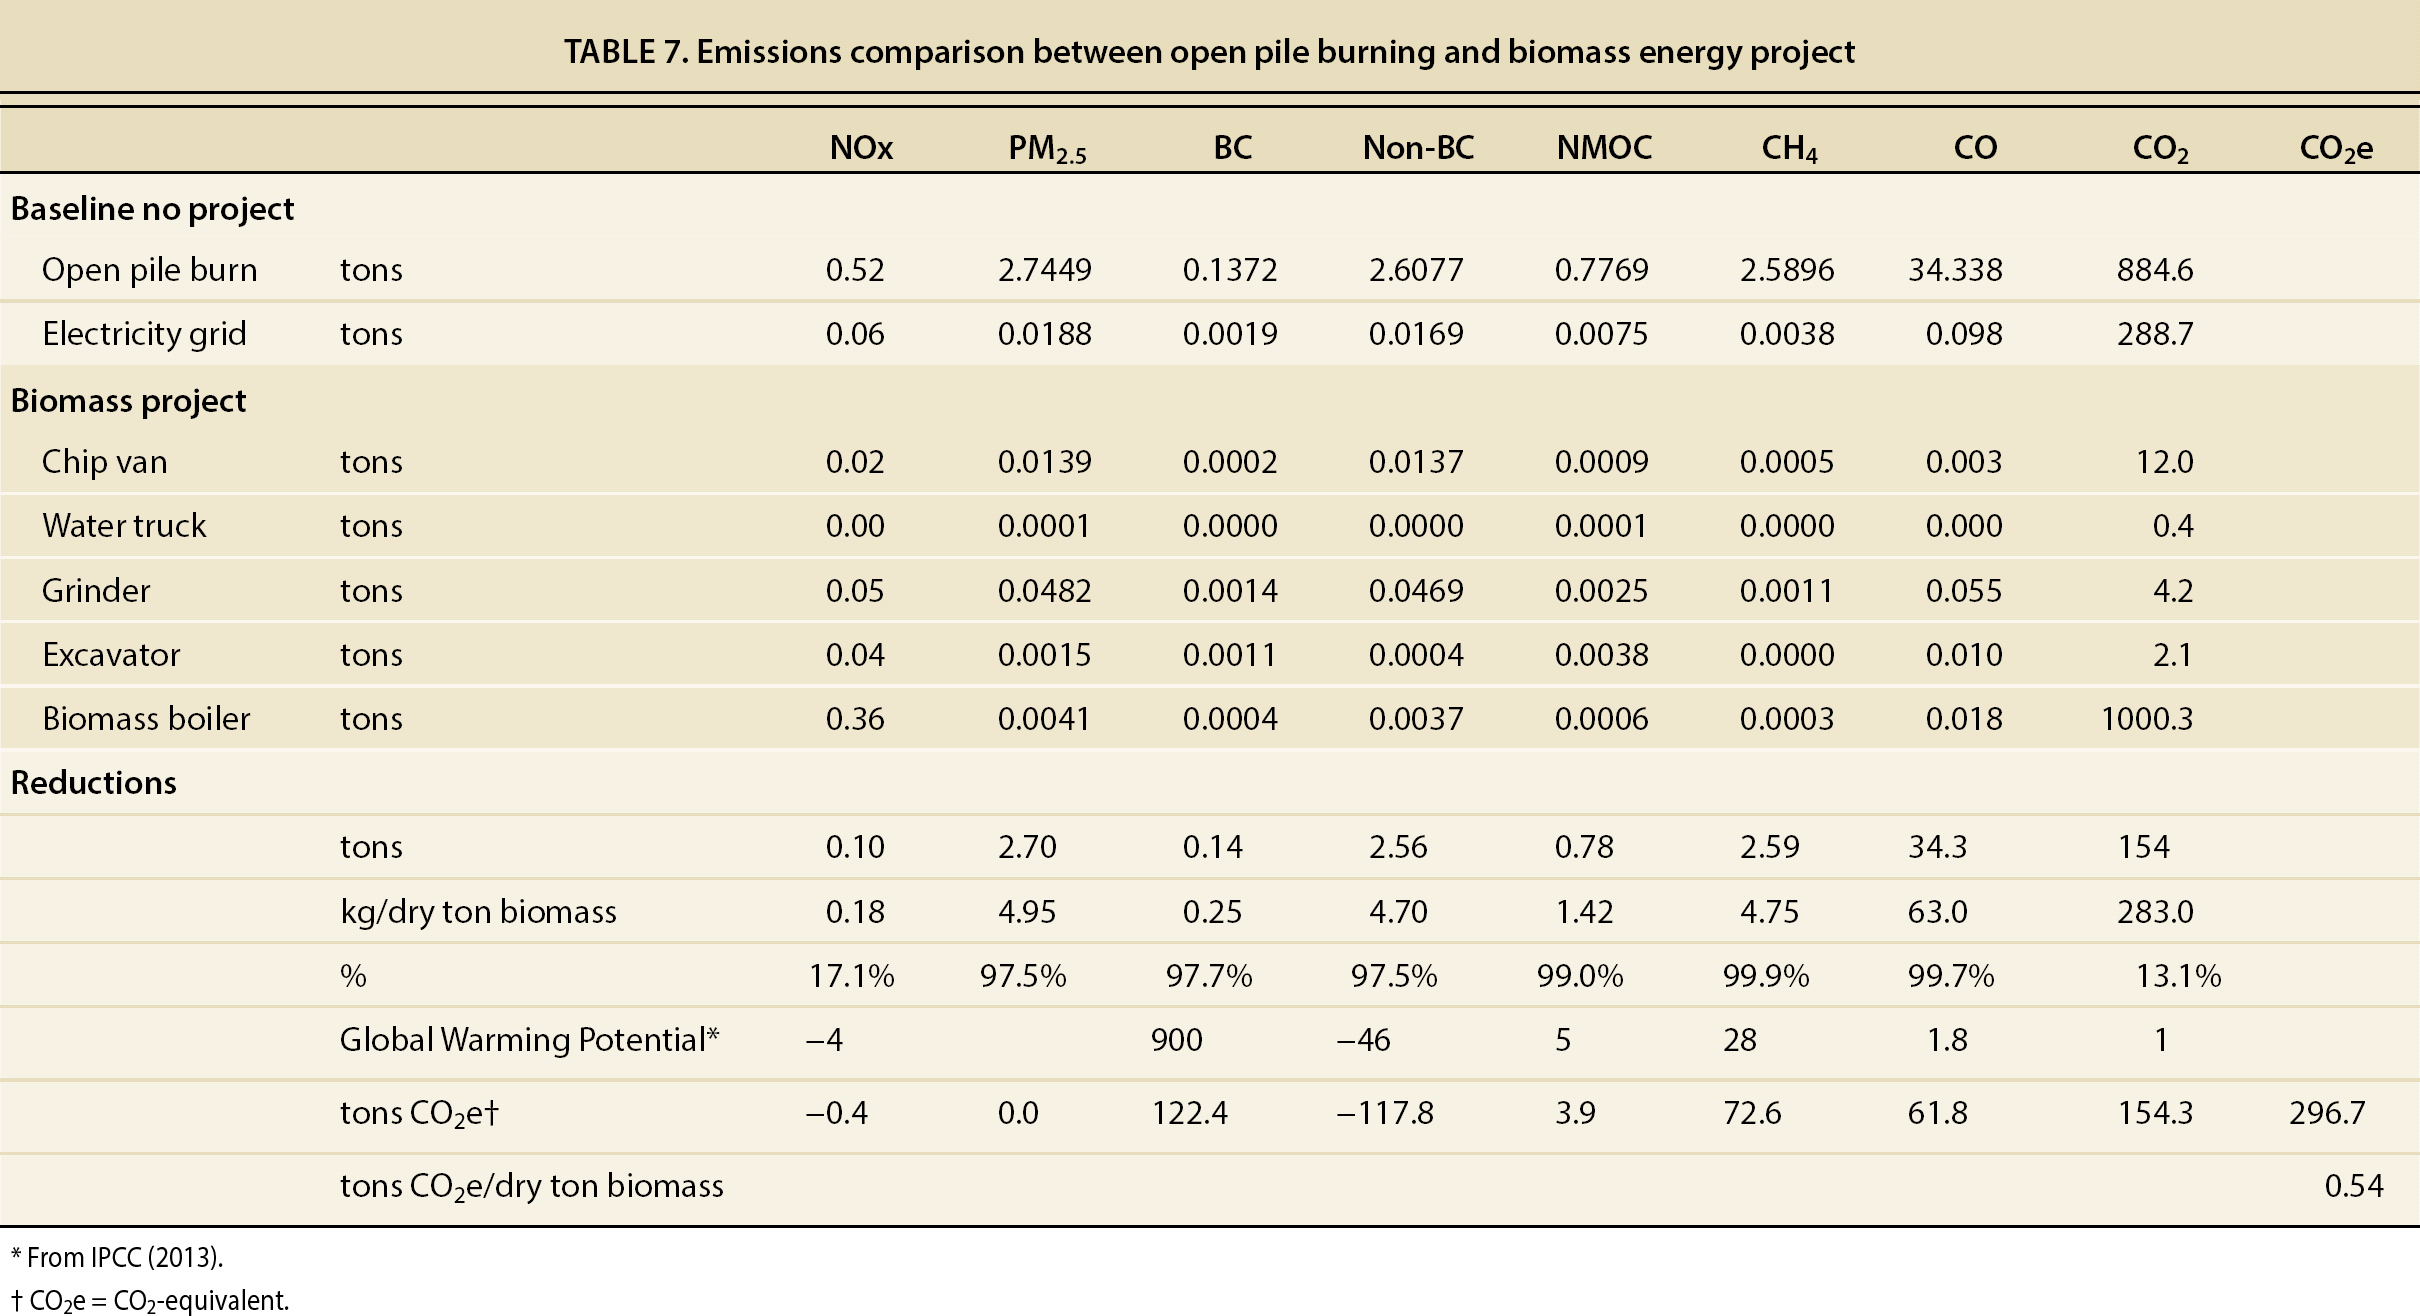 Emissions comparison between open pile burning and biomass energy project